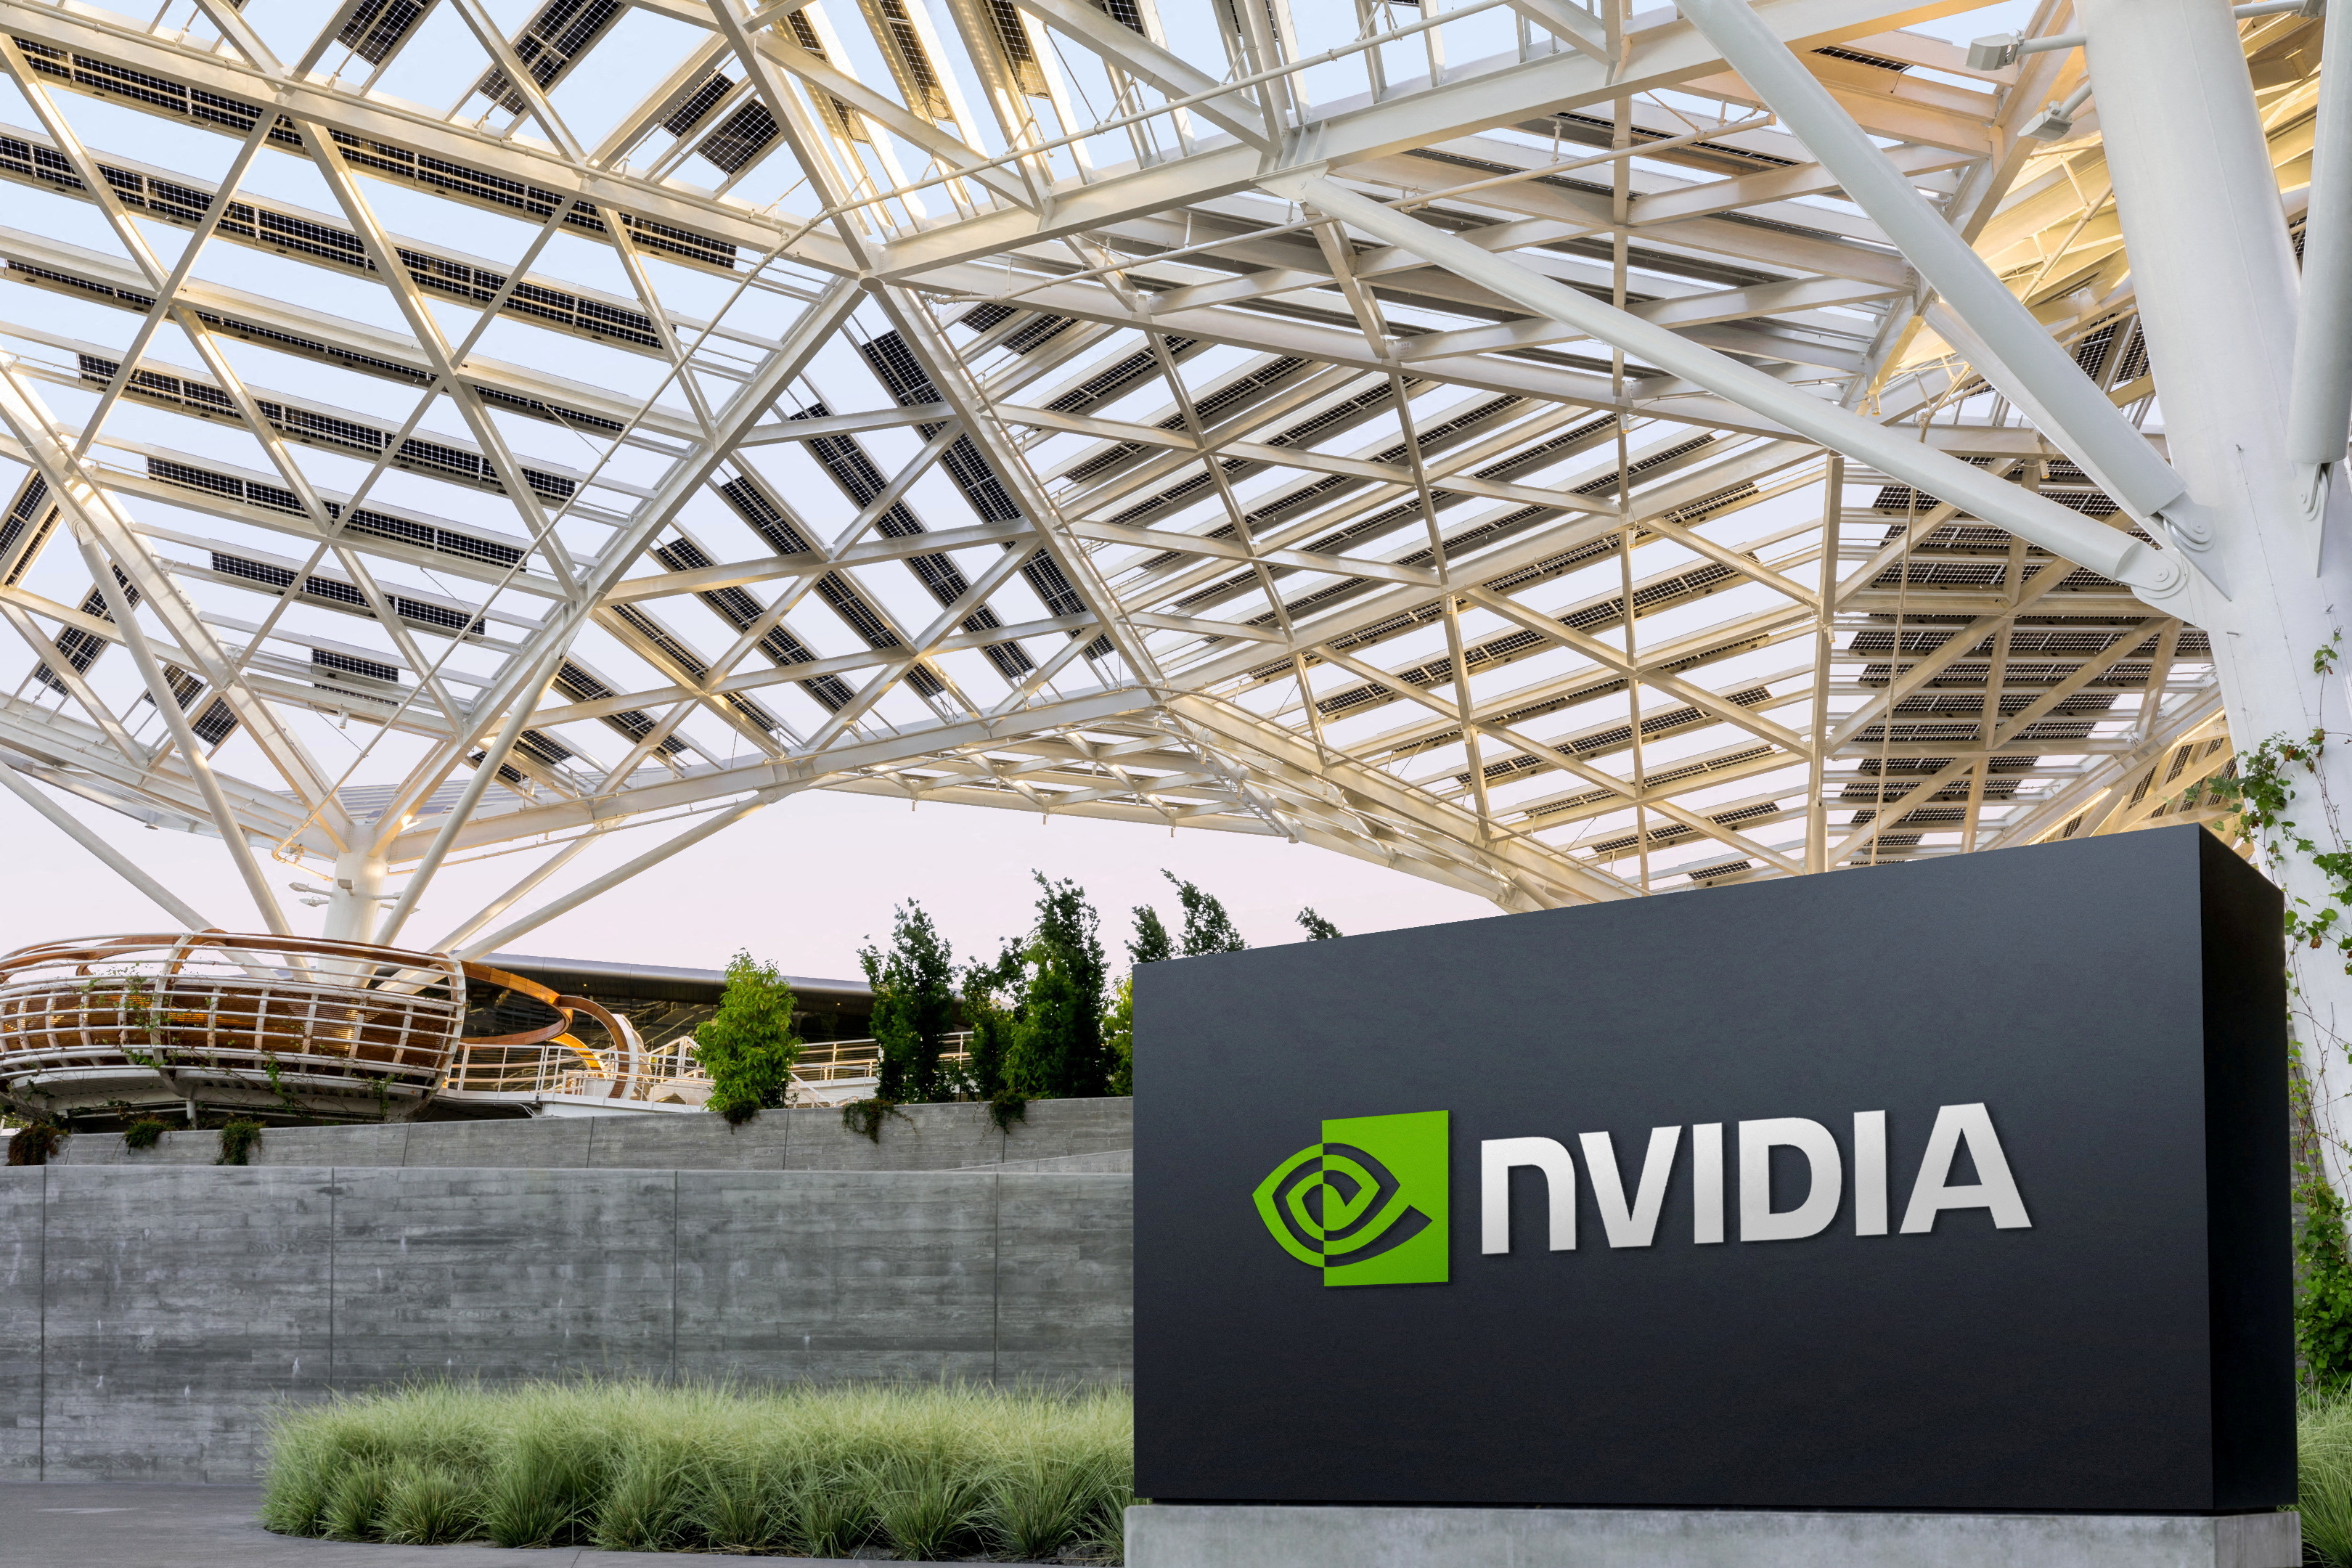 Nvidia's logo is seen at its corporate headquarters in California